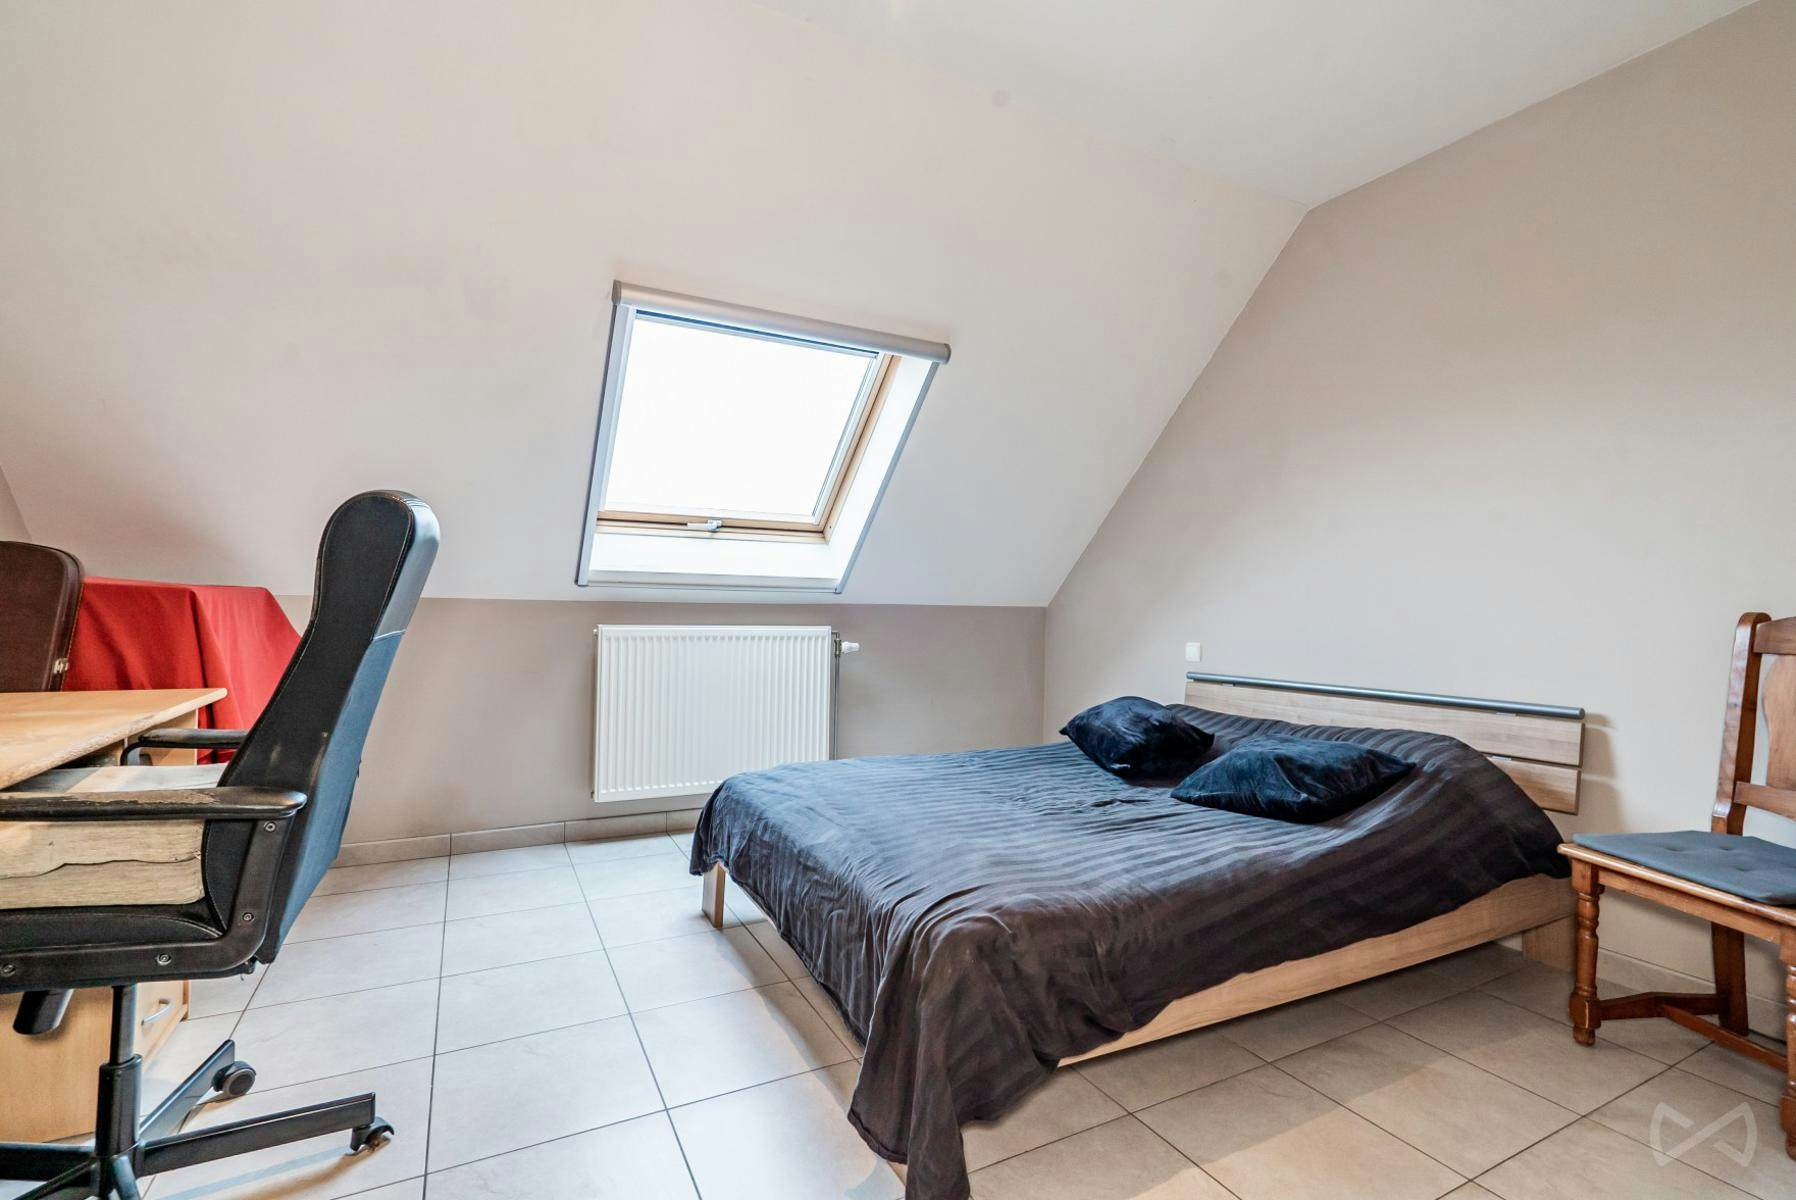 Picture 4 of 4 for Flat with four bedrooms in Leuze-en-hainaut